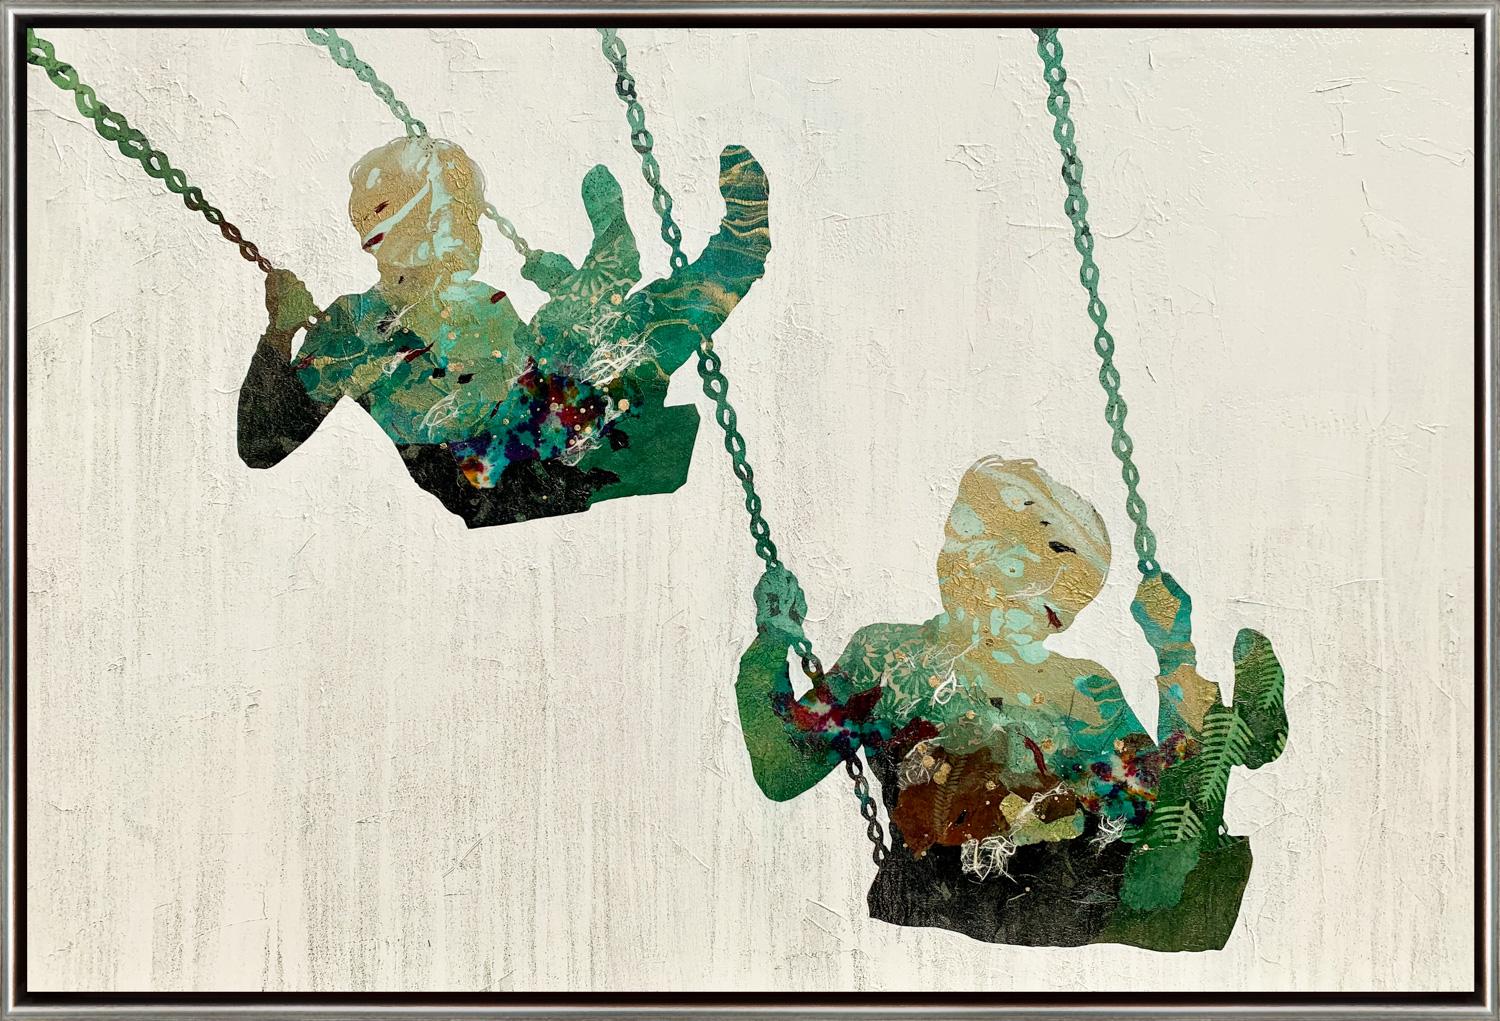 Christopher Peter Figurative Painting - "Up, Up, and Away" Contemporary Silhouettes Mixed Media on Canvas with Frame